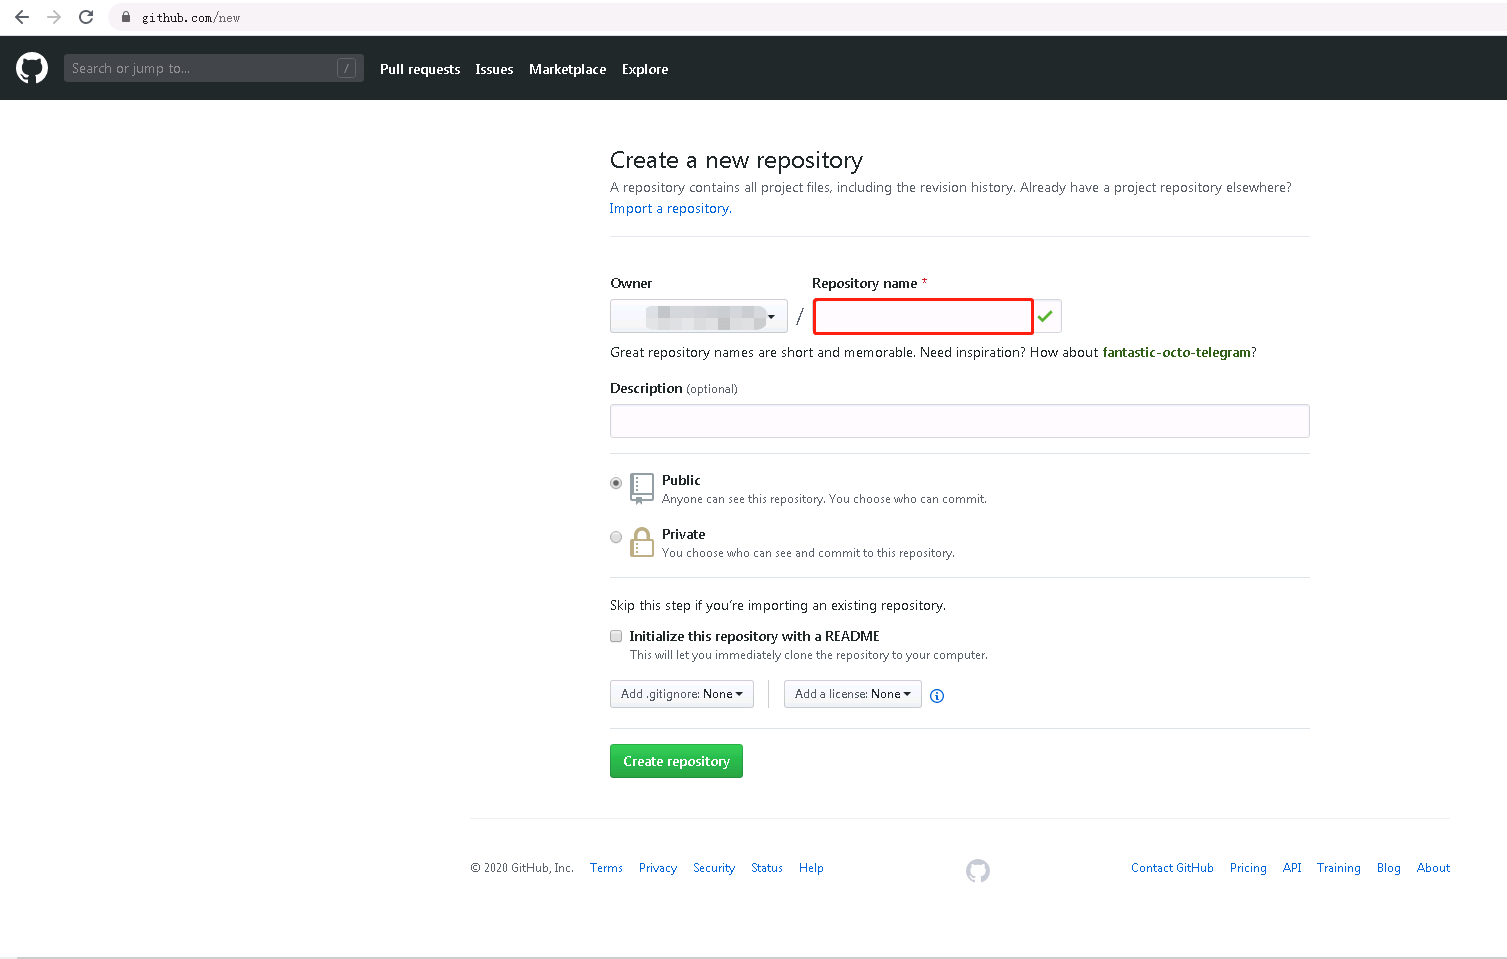 github_new_repository2.png